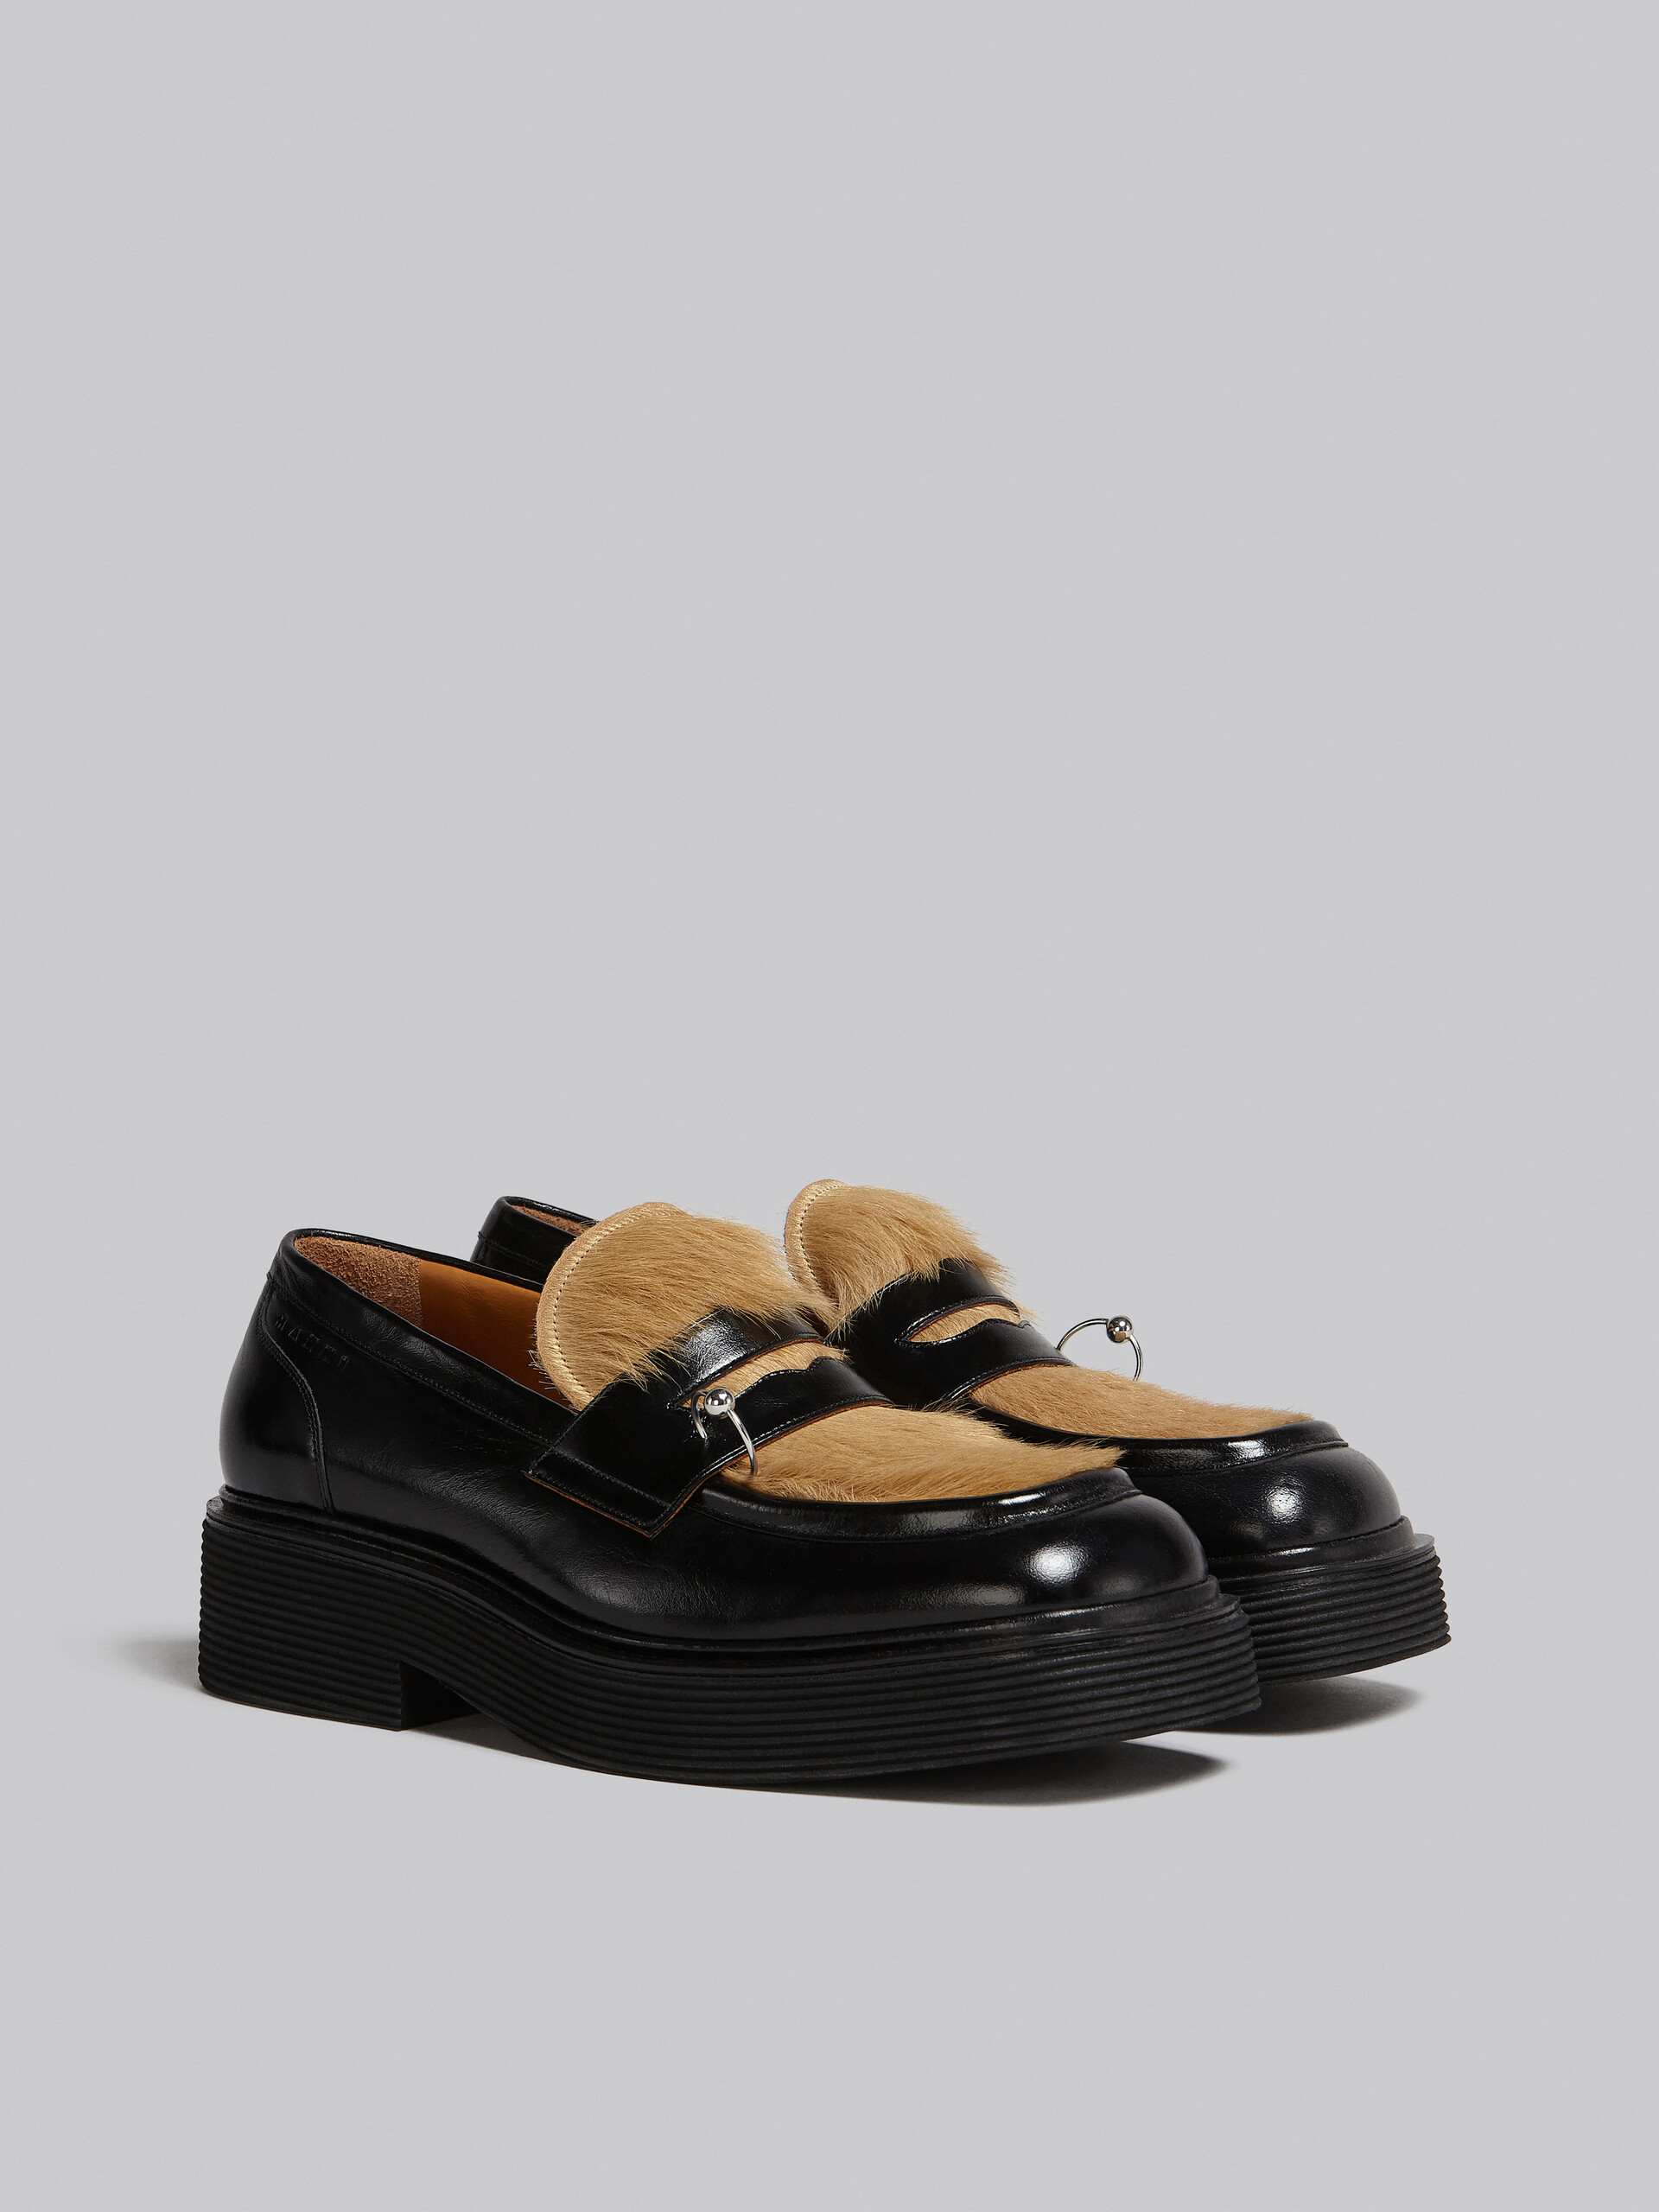 Black leather and beige long hair calfskin moccasin - Mocassin - Image 2